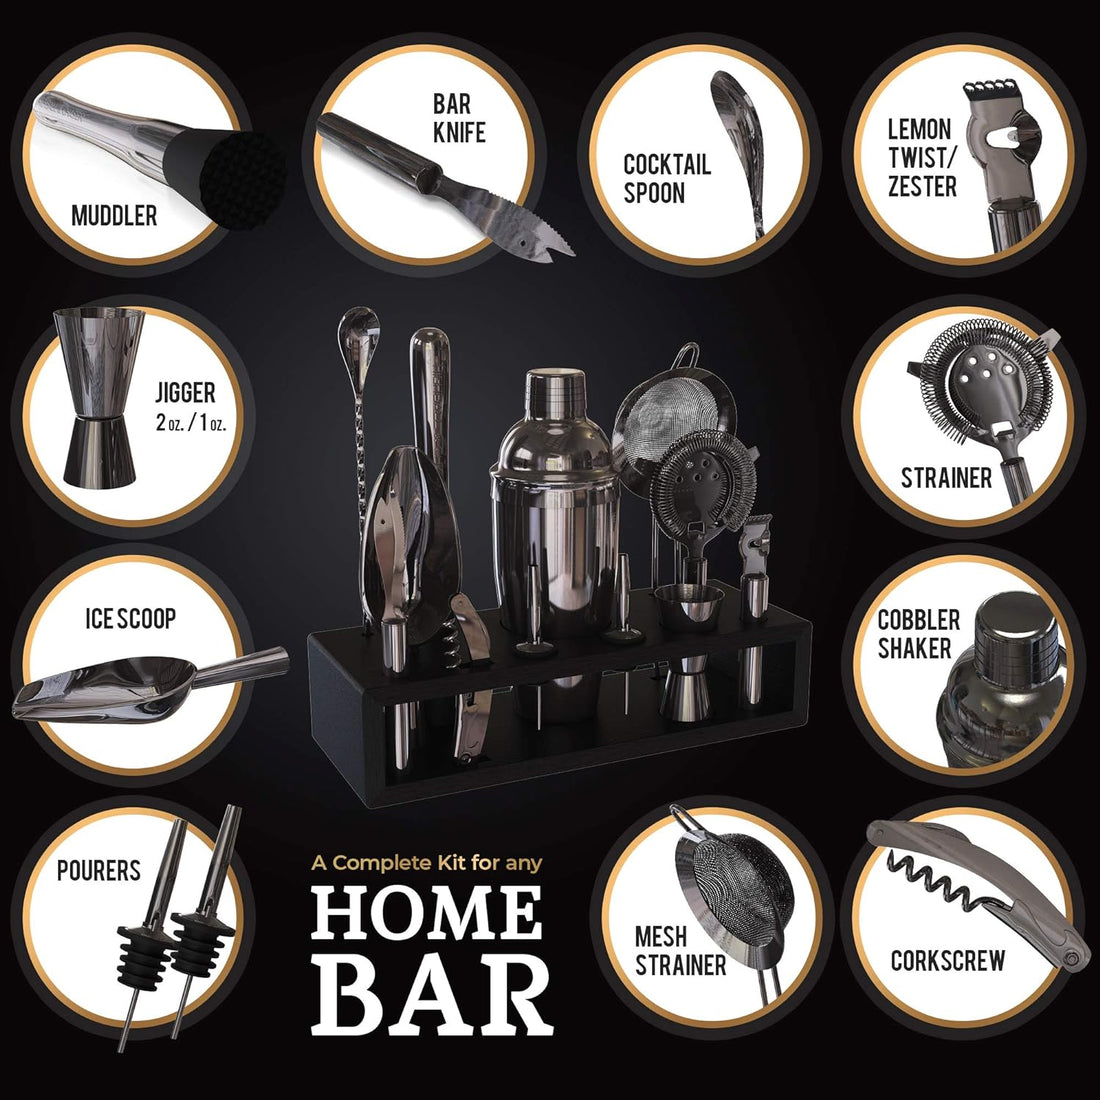 Highball & Chaser Gun Metal Black Plated Bartender Kit with Espresso Bamboo Stand. Beautiful Cobbler Cocktail Shaker Set with Highest Quality Bar Tools Rustproof Stainless Steel Bar Set